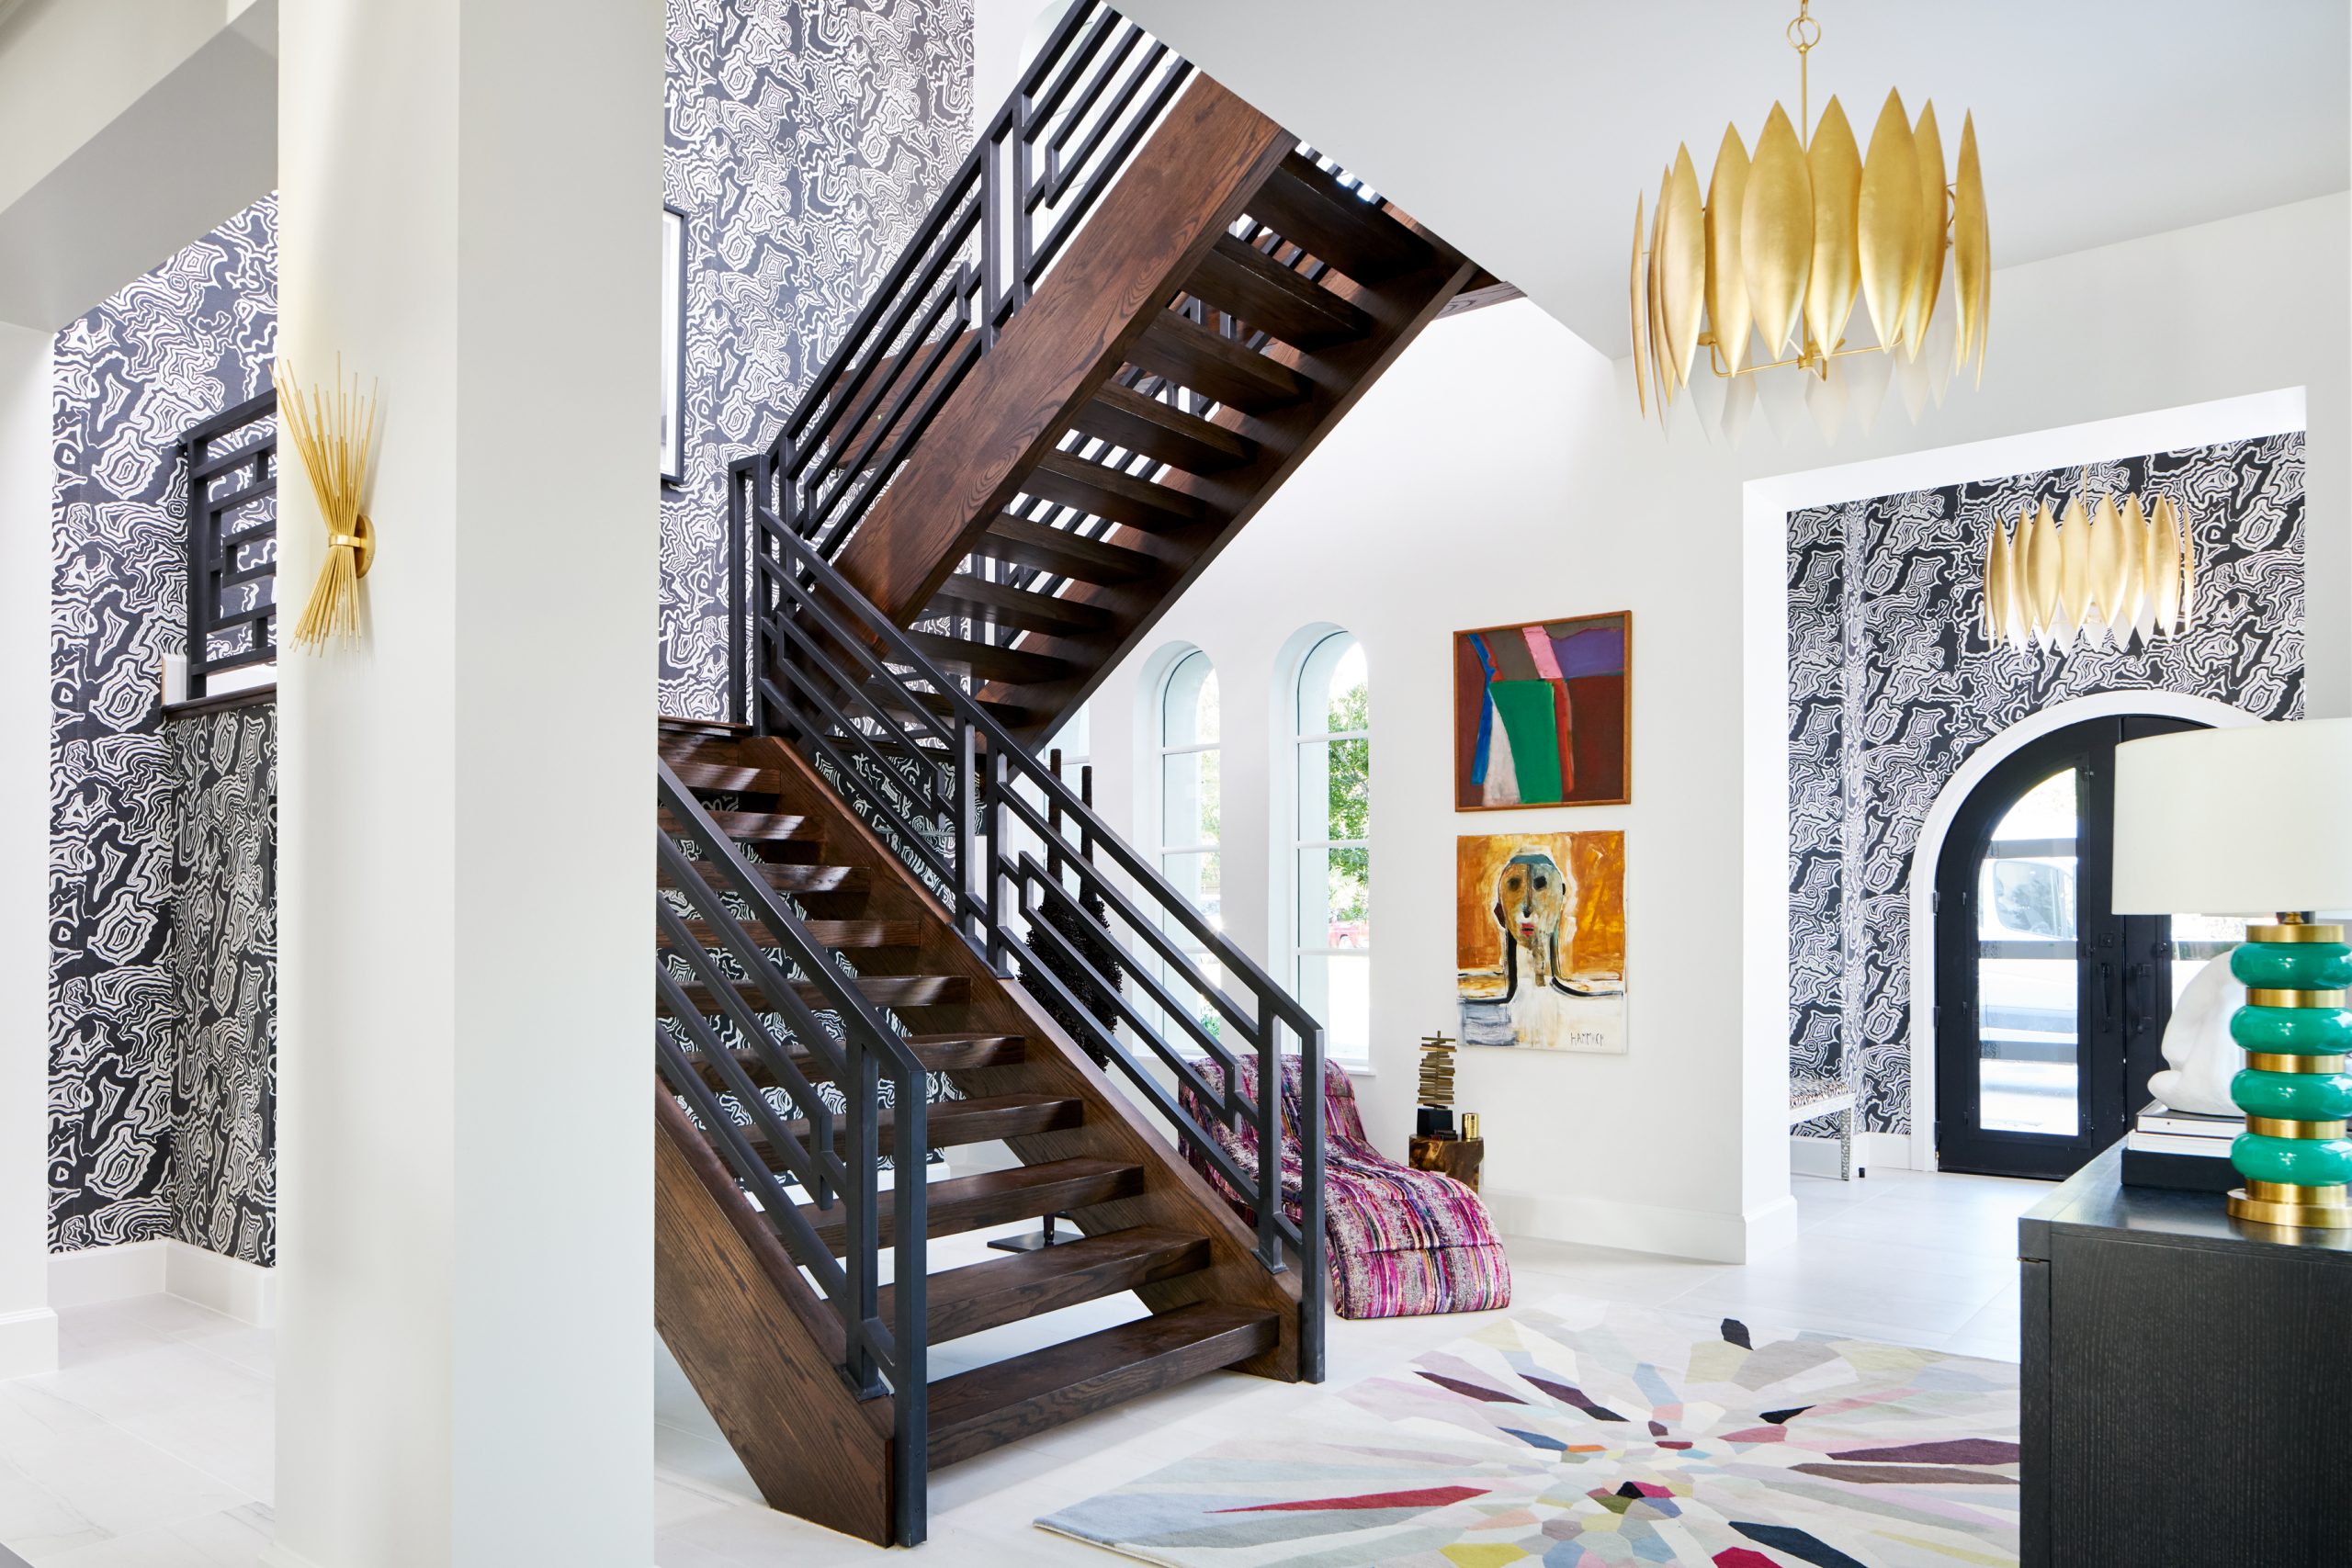 Traditional Home Dallas Showhouse, Bridget Beari Wallcovering, Buscemi wall covering, tina turner art, geometric railing, chaise lounger, s. harris brushstroke, double volume entry, modern staircase, entryway, circa lighting, gold chandelier, green and gold lamp, easel, Jonathan Adler easel, coffee table books, tom ford book, harpers bazaar book, credenza, dark credenza, black credenza, circle accent furniture, bowl, s. harris, drapery, curtains , gold lighting, gold chandelier, colorful rug, the rug company, original art, human form art